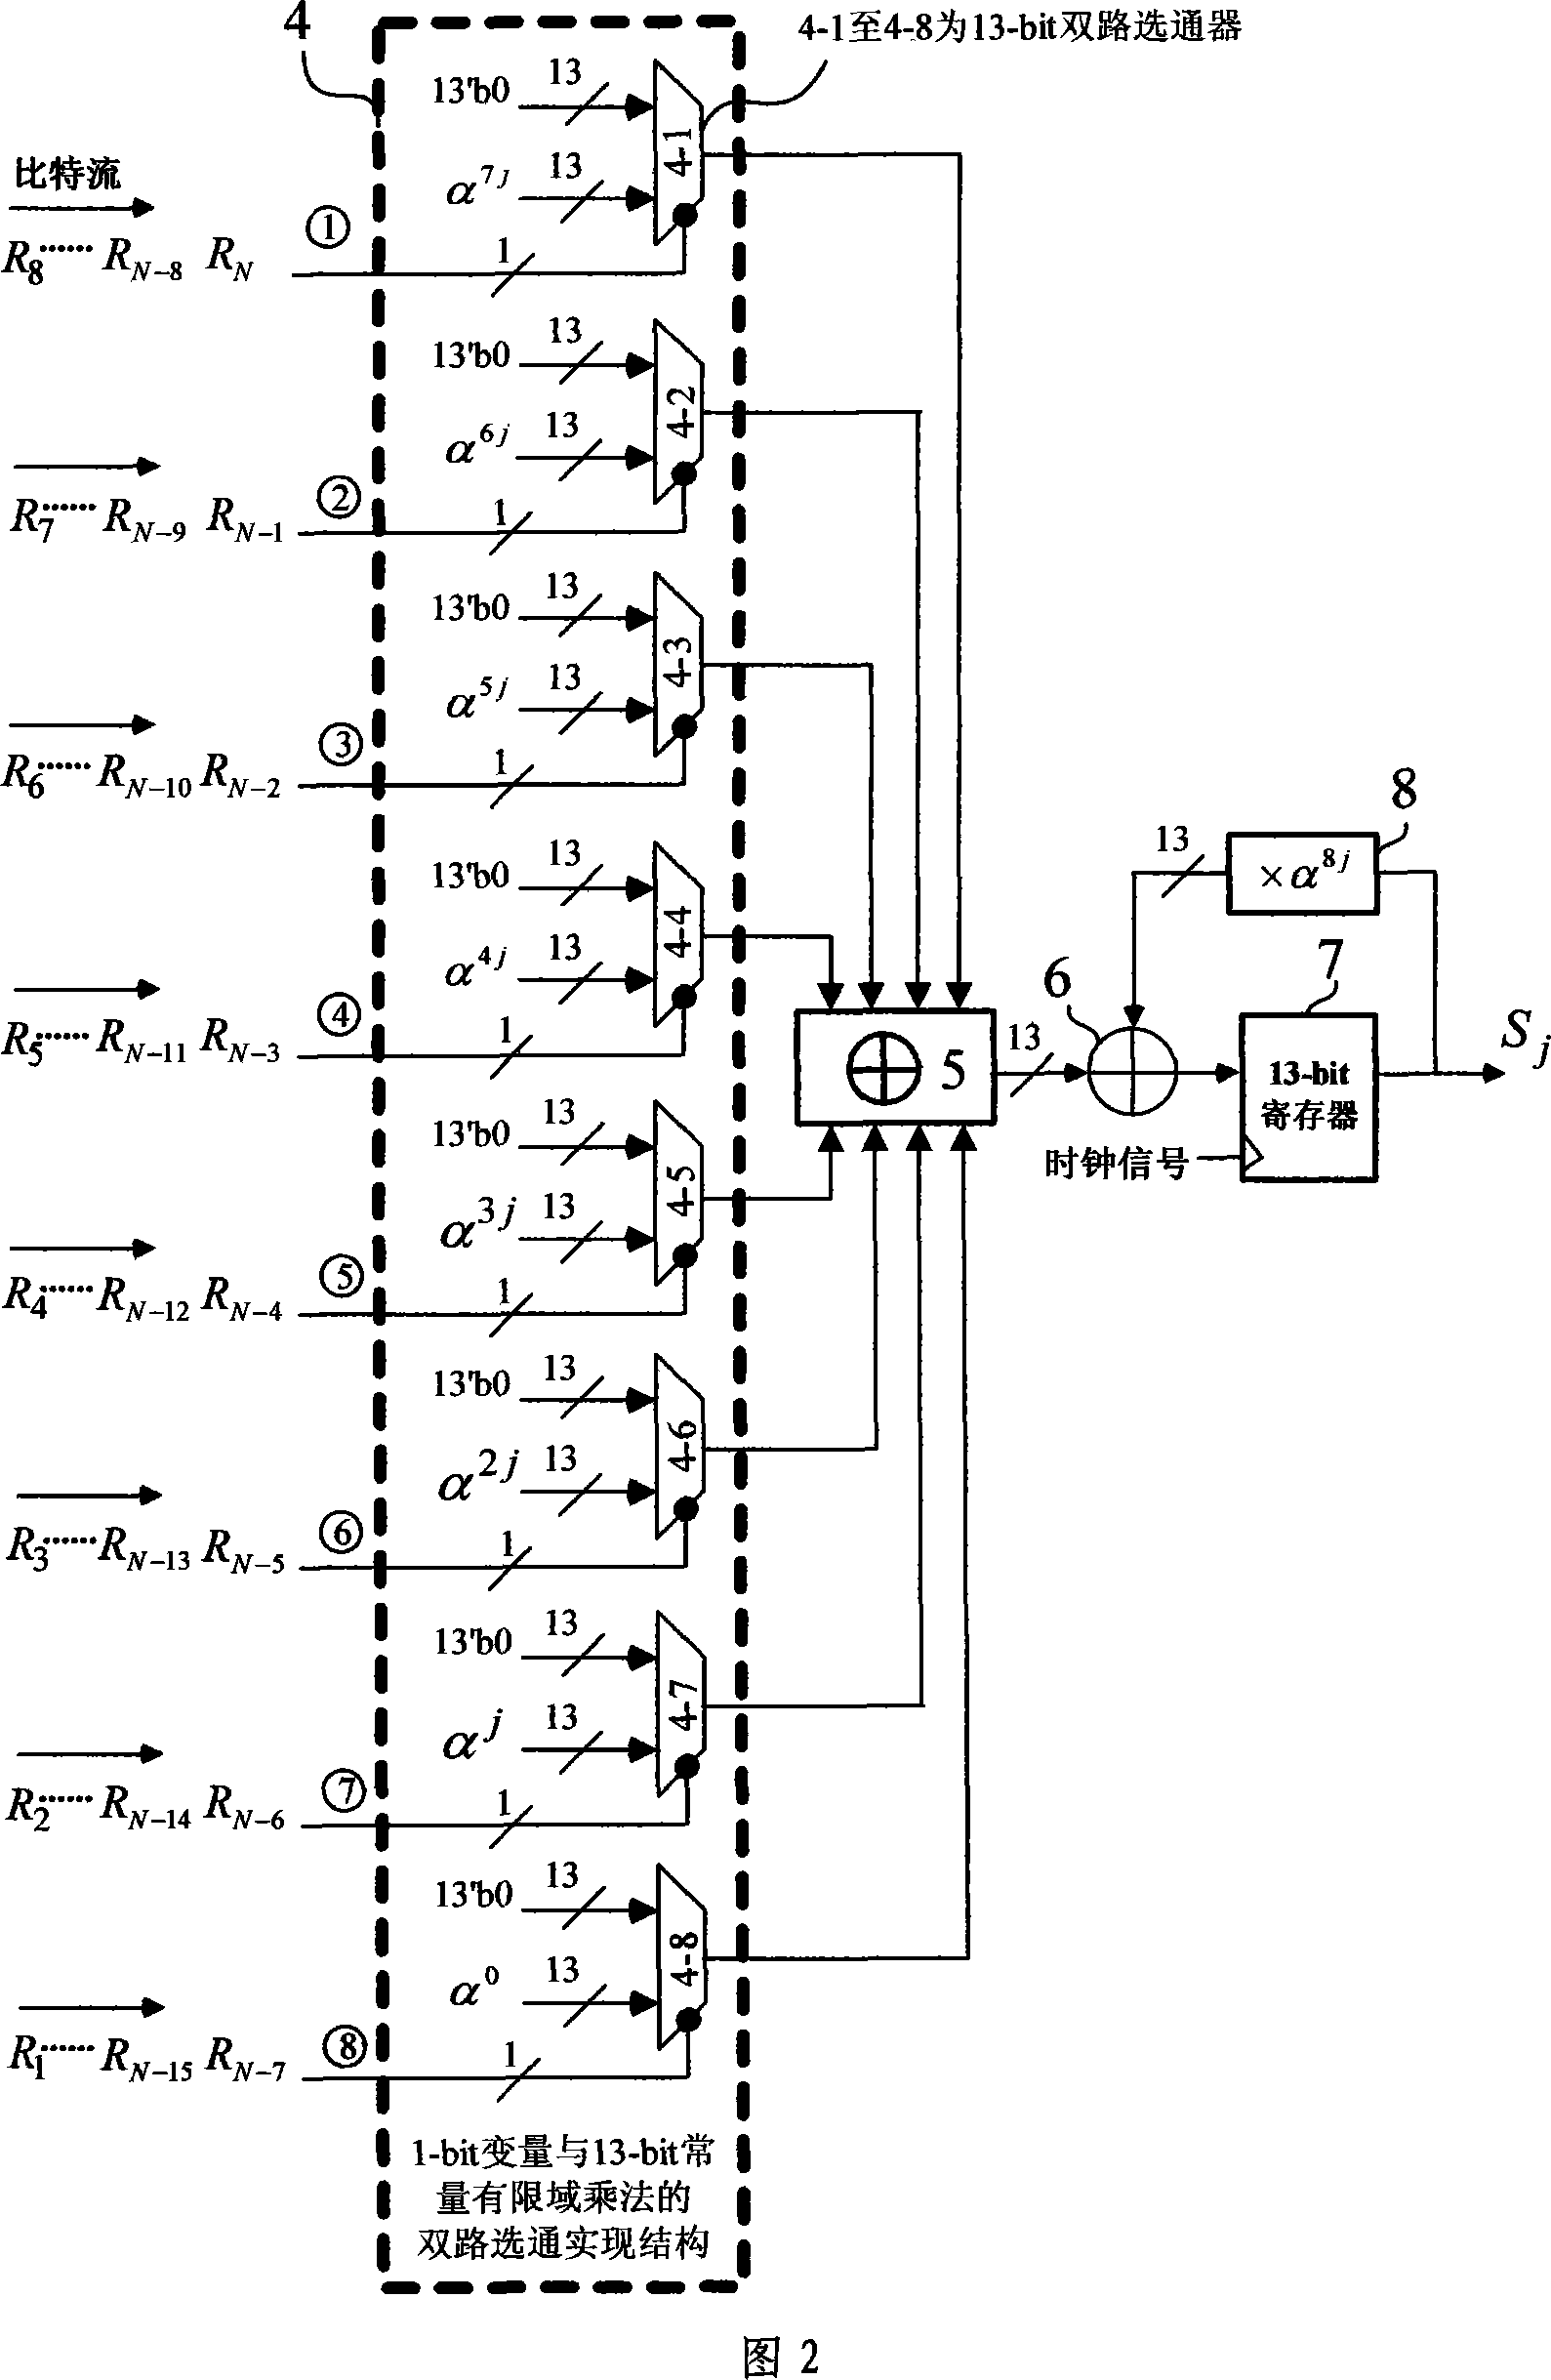 Area compact type BCH paralleling decoding circuit supporting pre searching